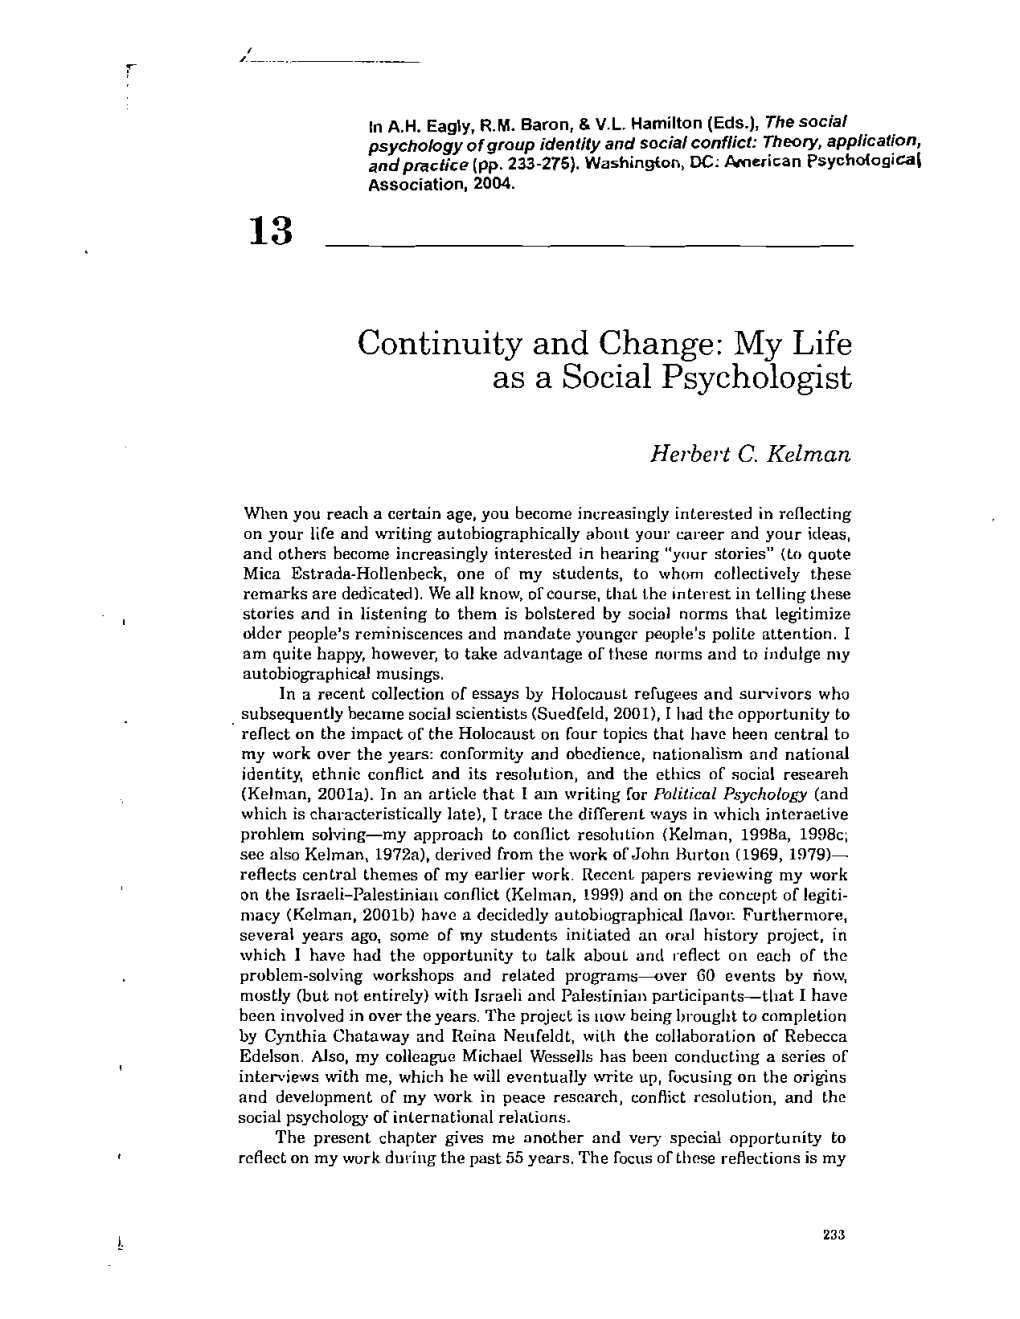 Kelman, H. C. (2004). Continuity and Change: My Life As a Social